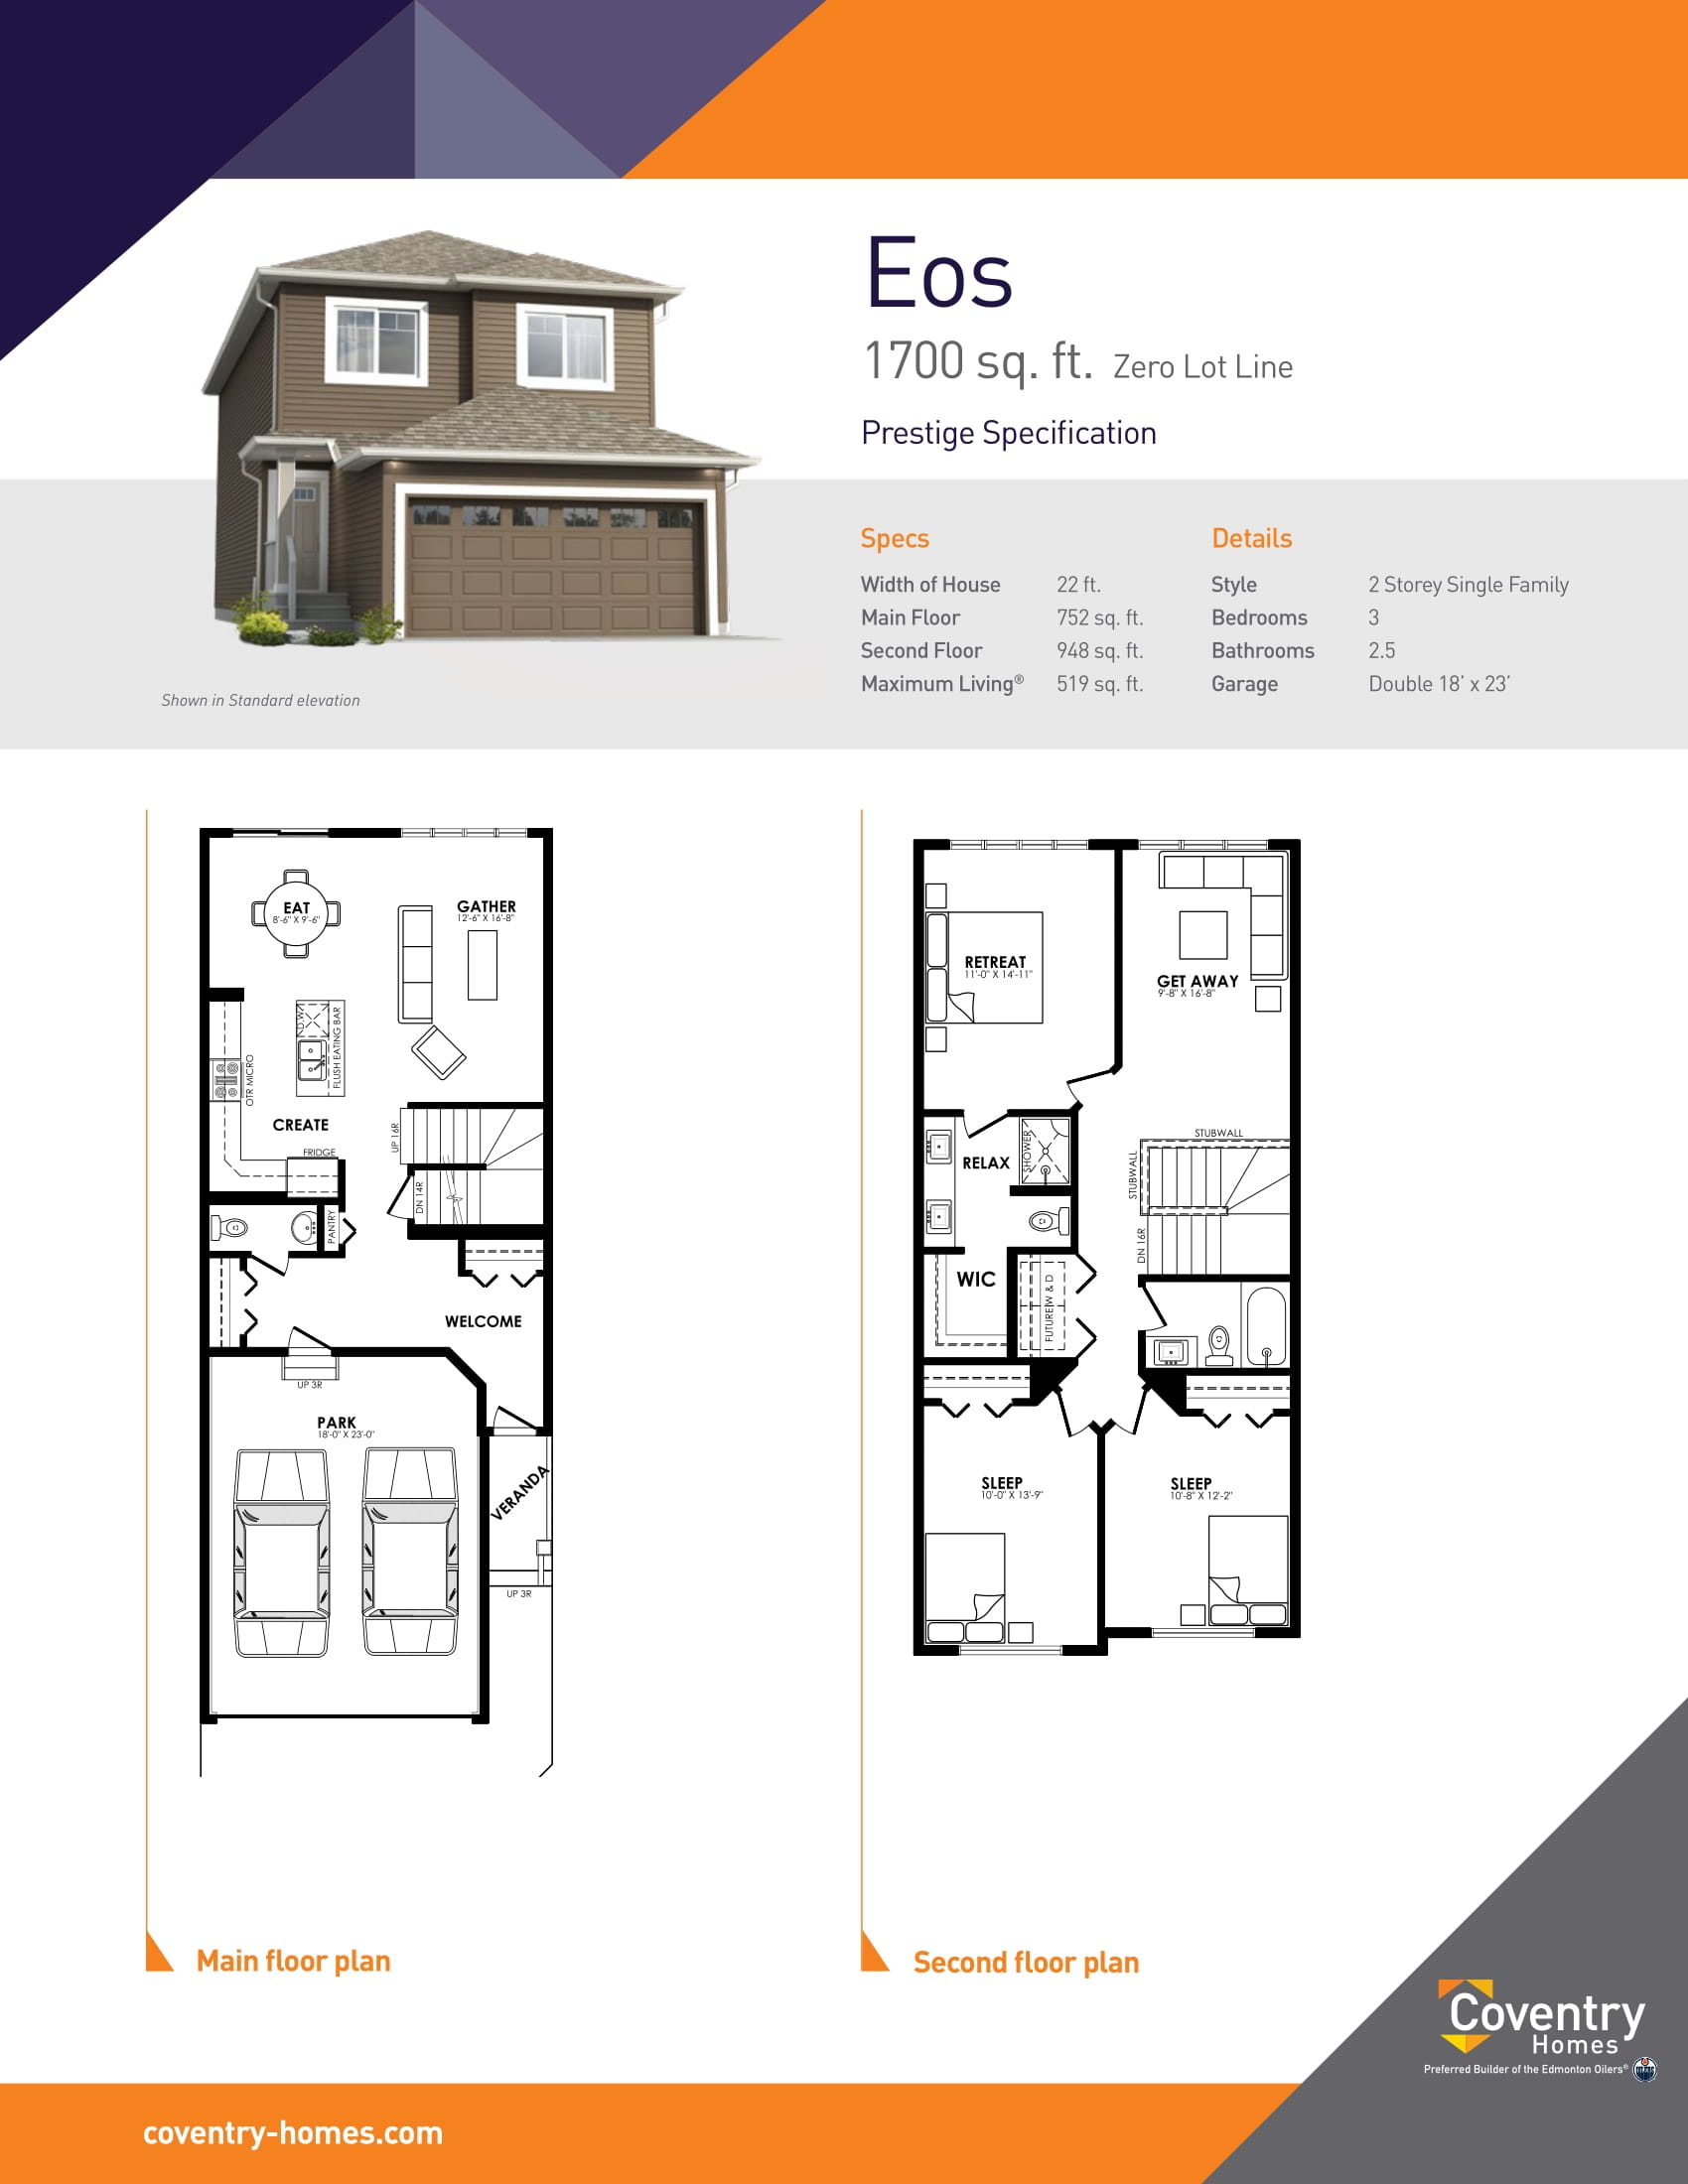 Eos Floor Plan of Keswick Landing Coventry Homes with undefined beds